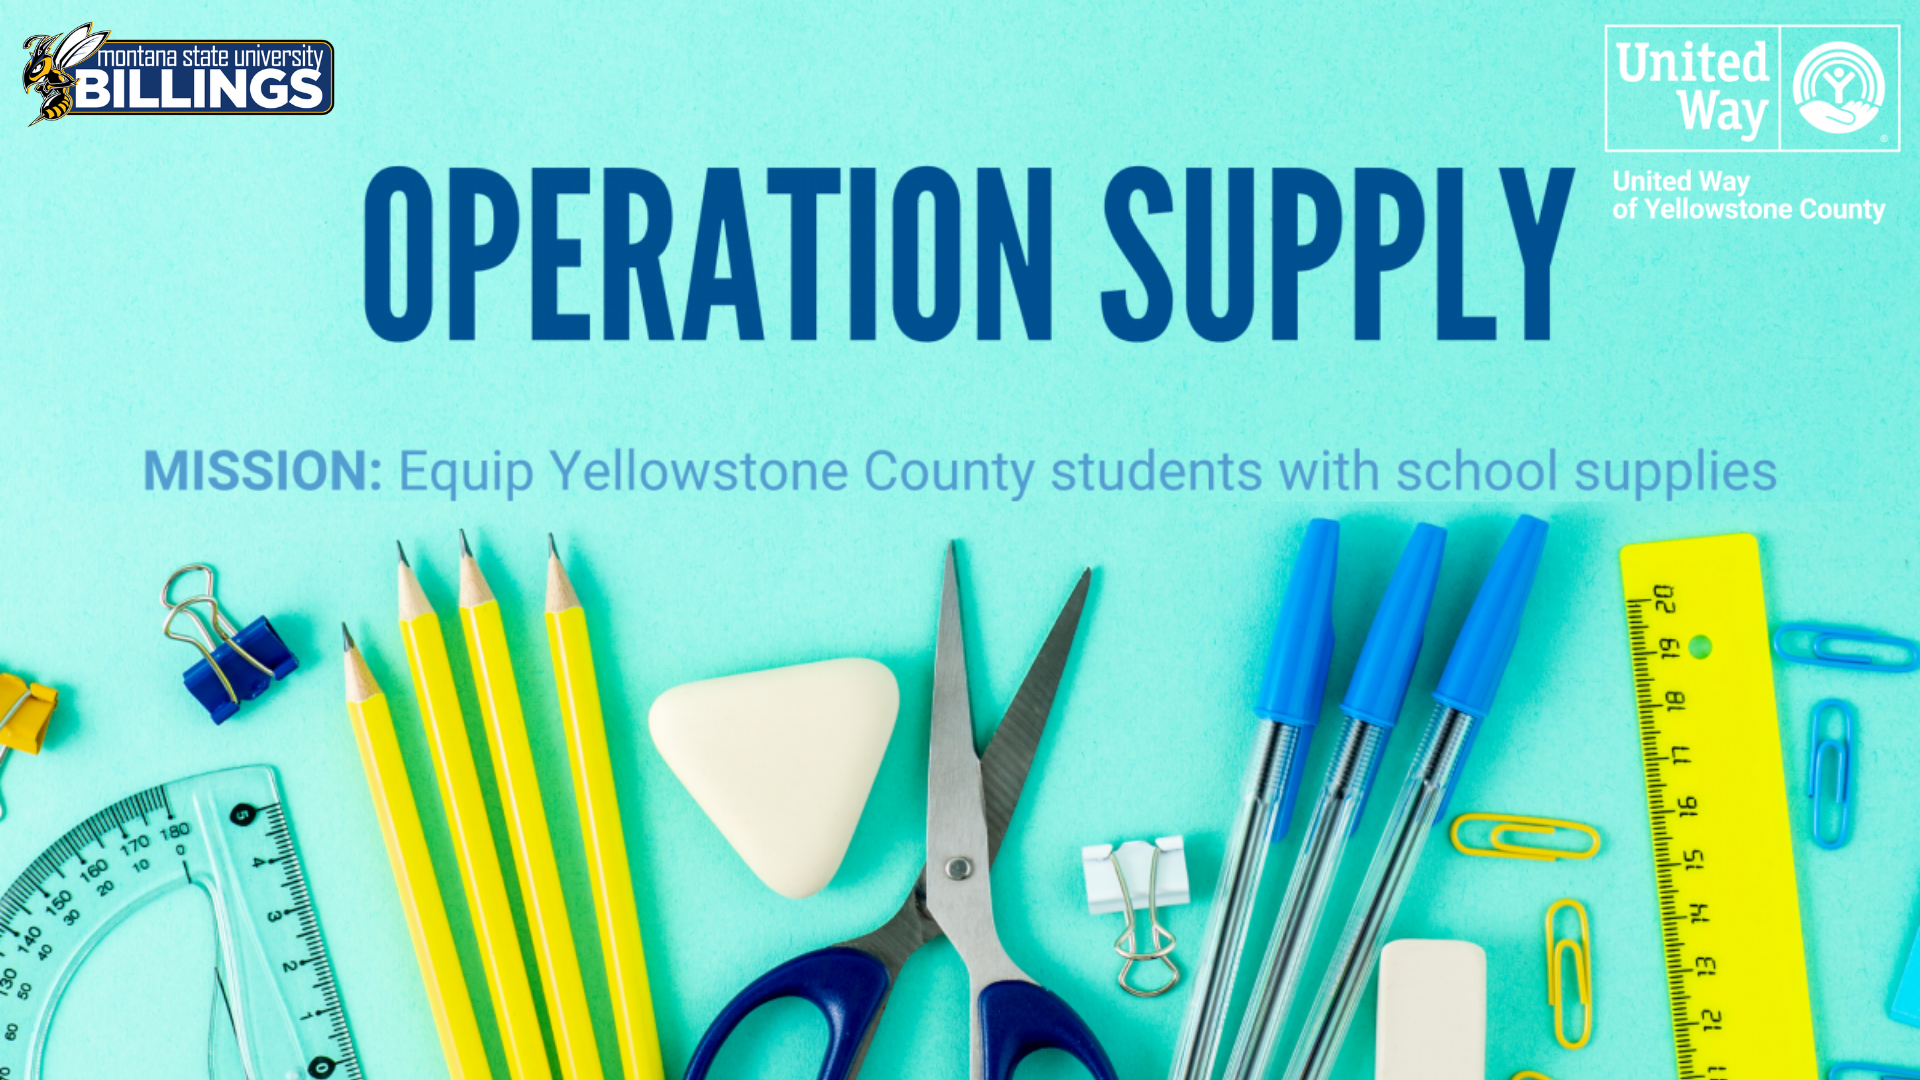 Operation Supply. Mission: Equip Yellowstone County students with school supplies. United Way of Yellowstone County.